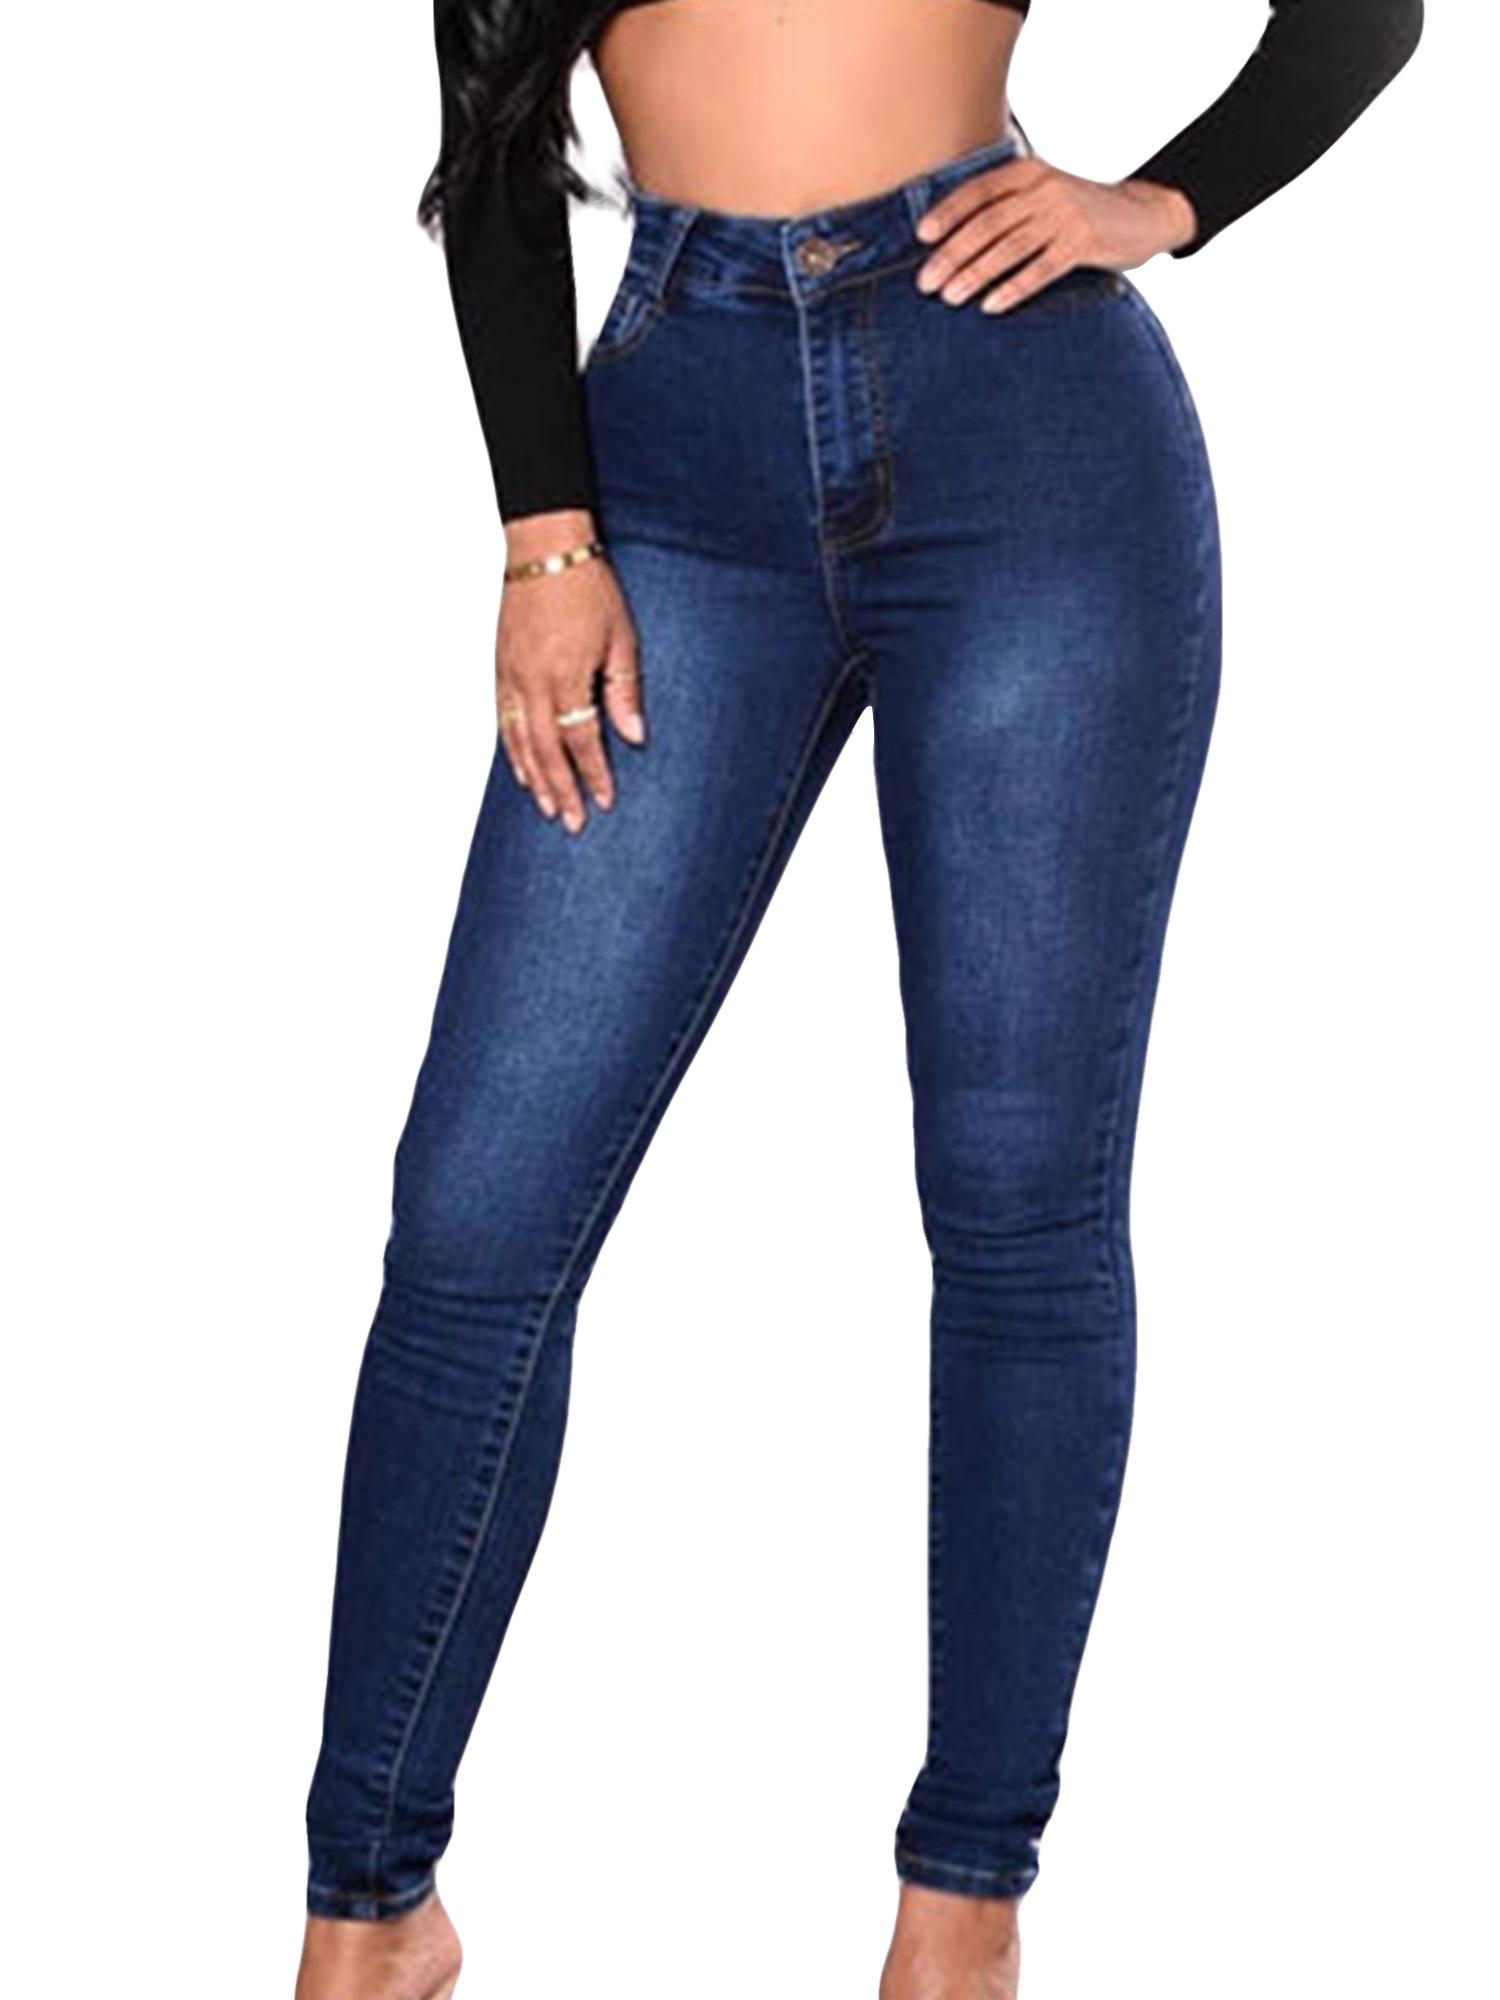 Women High Waist Jeans Pants Skinny Jeggings Pants Casual Bodycon Stretchy Pencil Pants Ladies Fashion Denim Pants Trousers - image 1 of 5